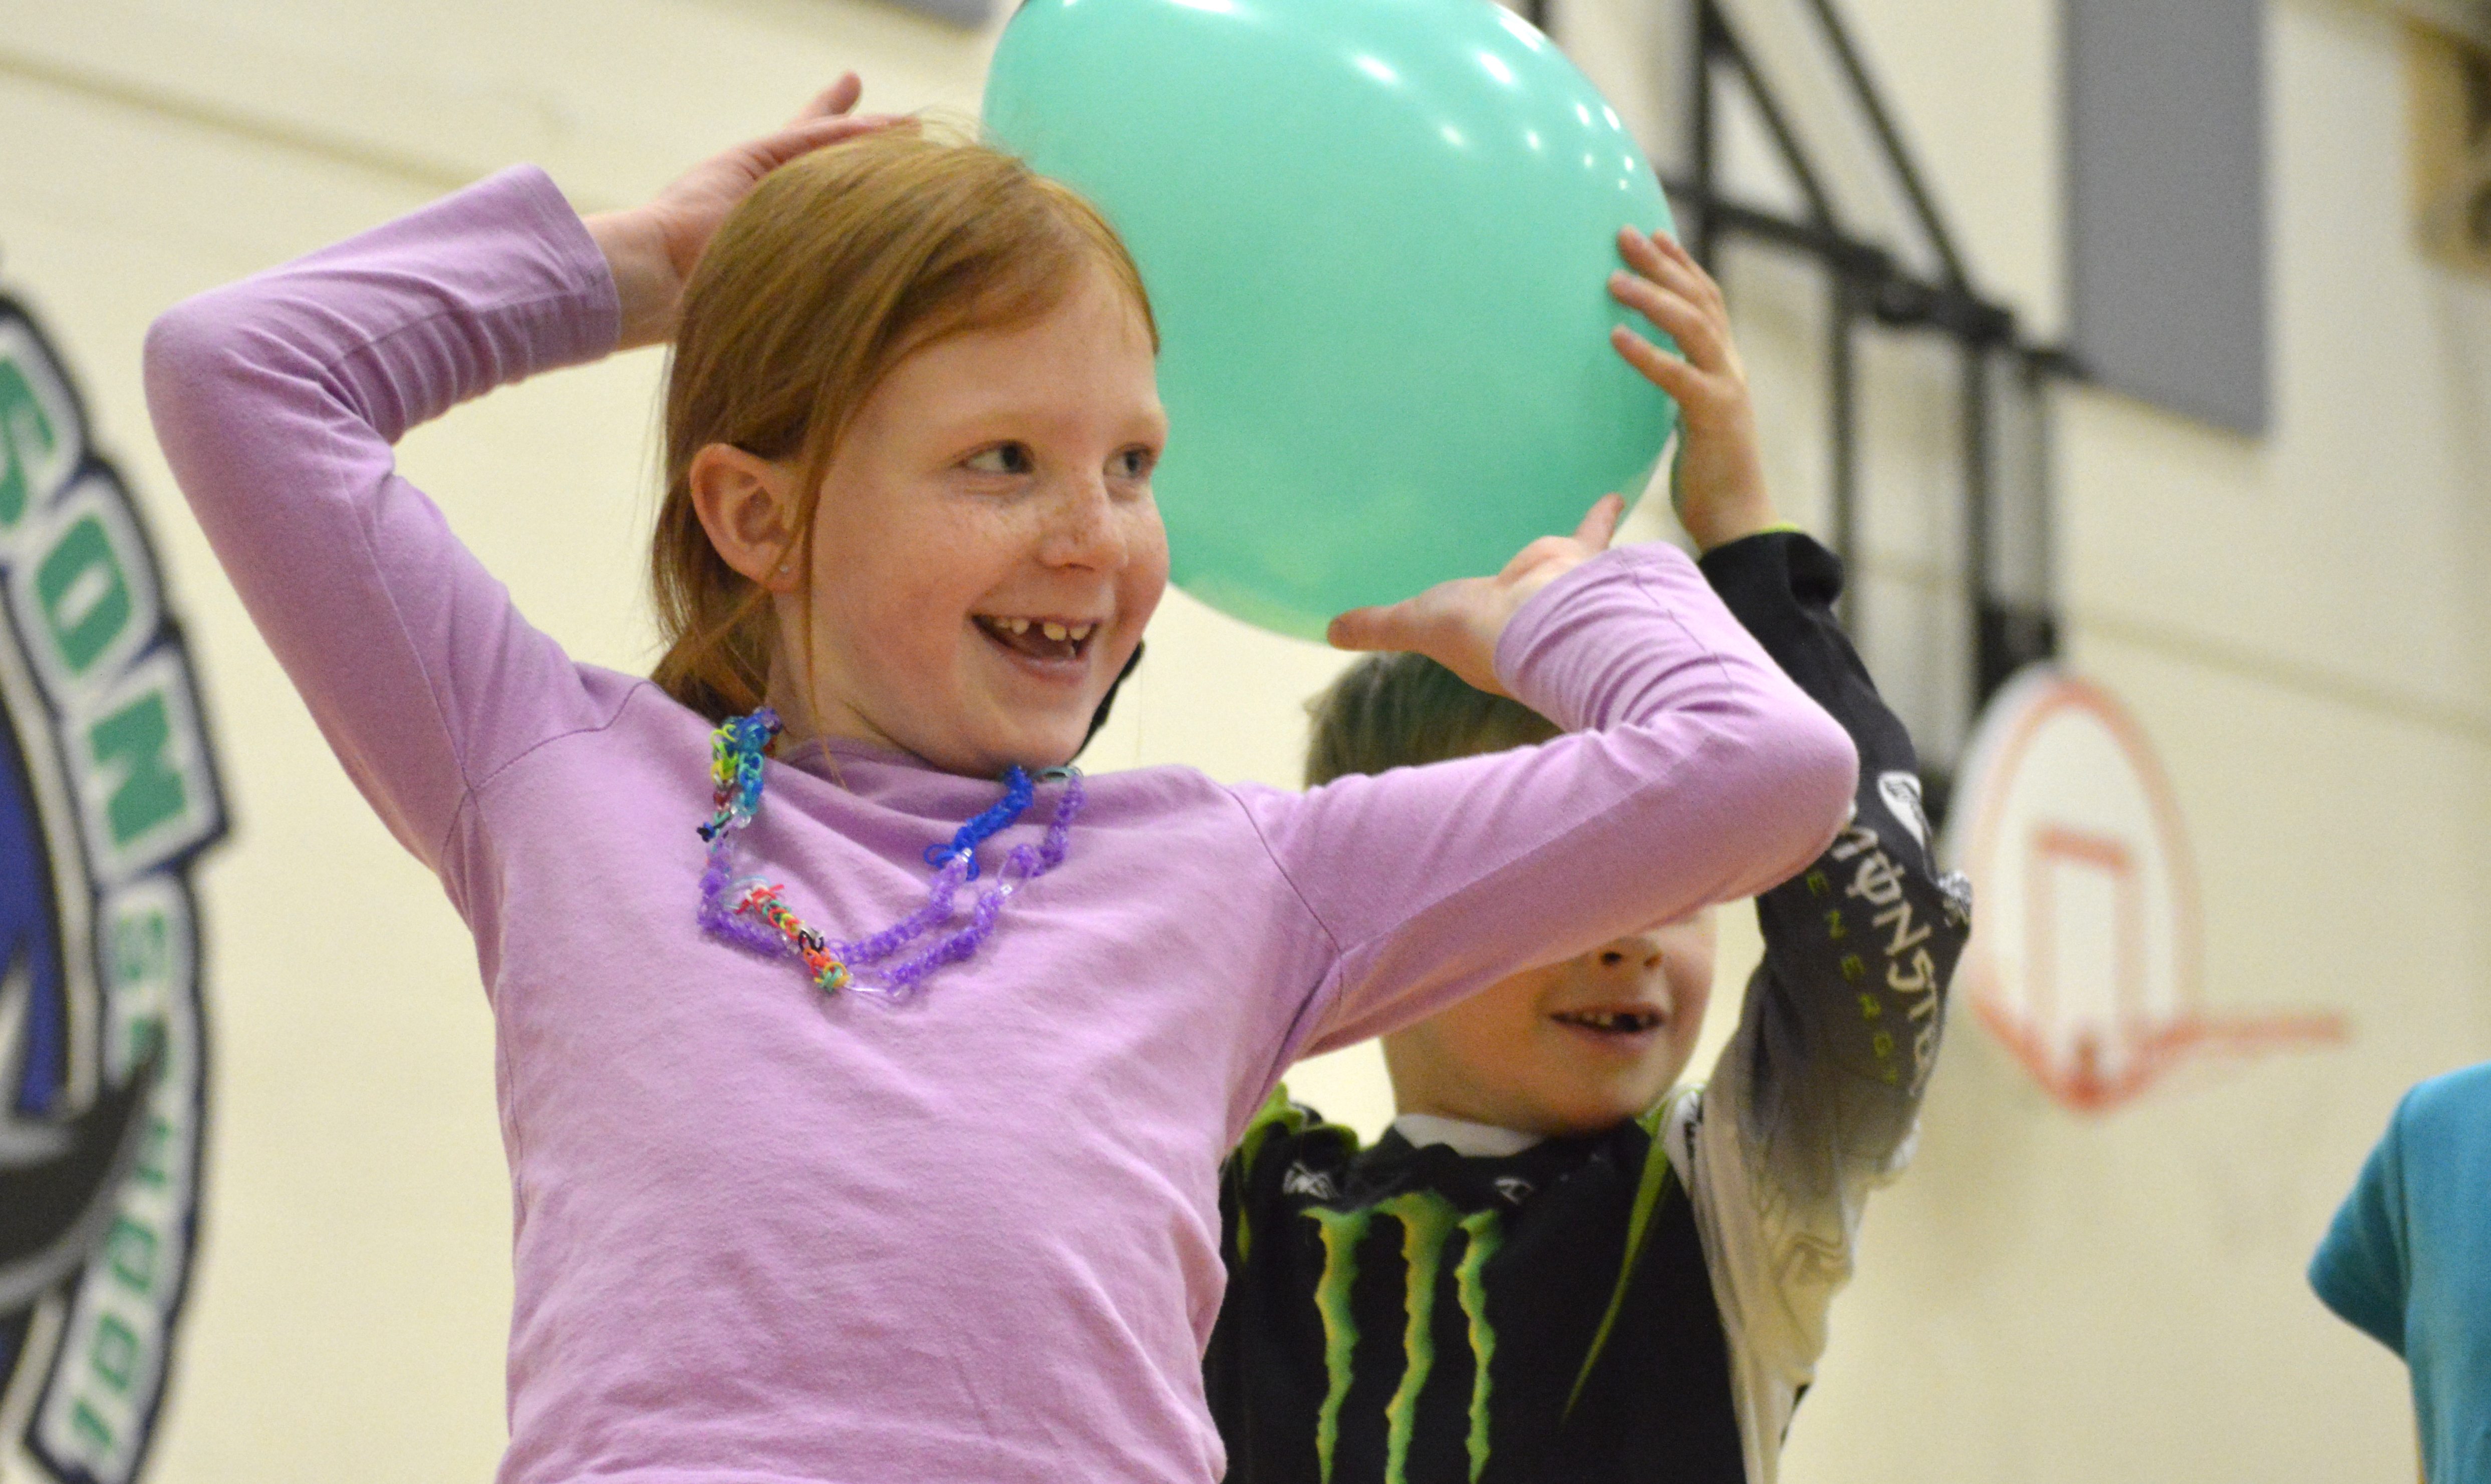 GETTING ACTIVE - Grade 1 student Sarah Lerouge participated in a balloon relay at Barry Wilson Elementary on Monday. That day their class kicked off the 2019 Canada Winter Games Activity Challenge